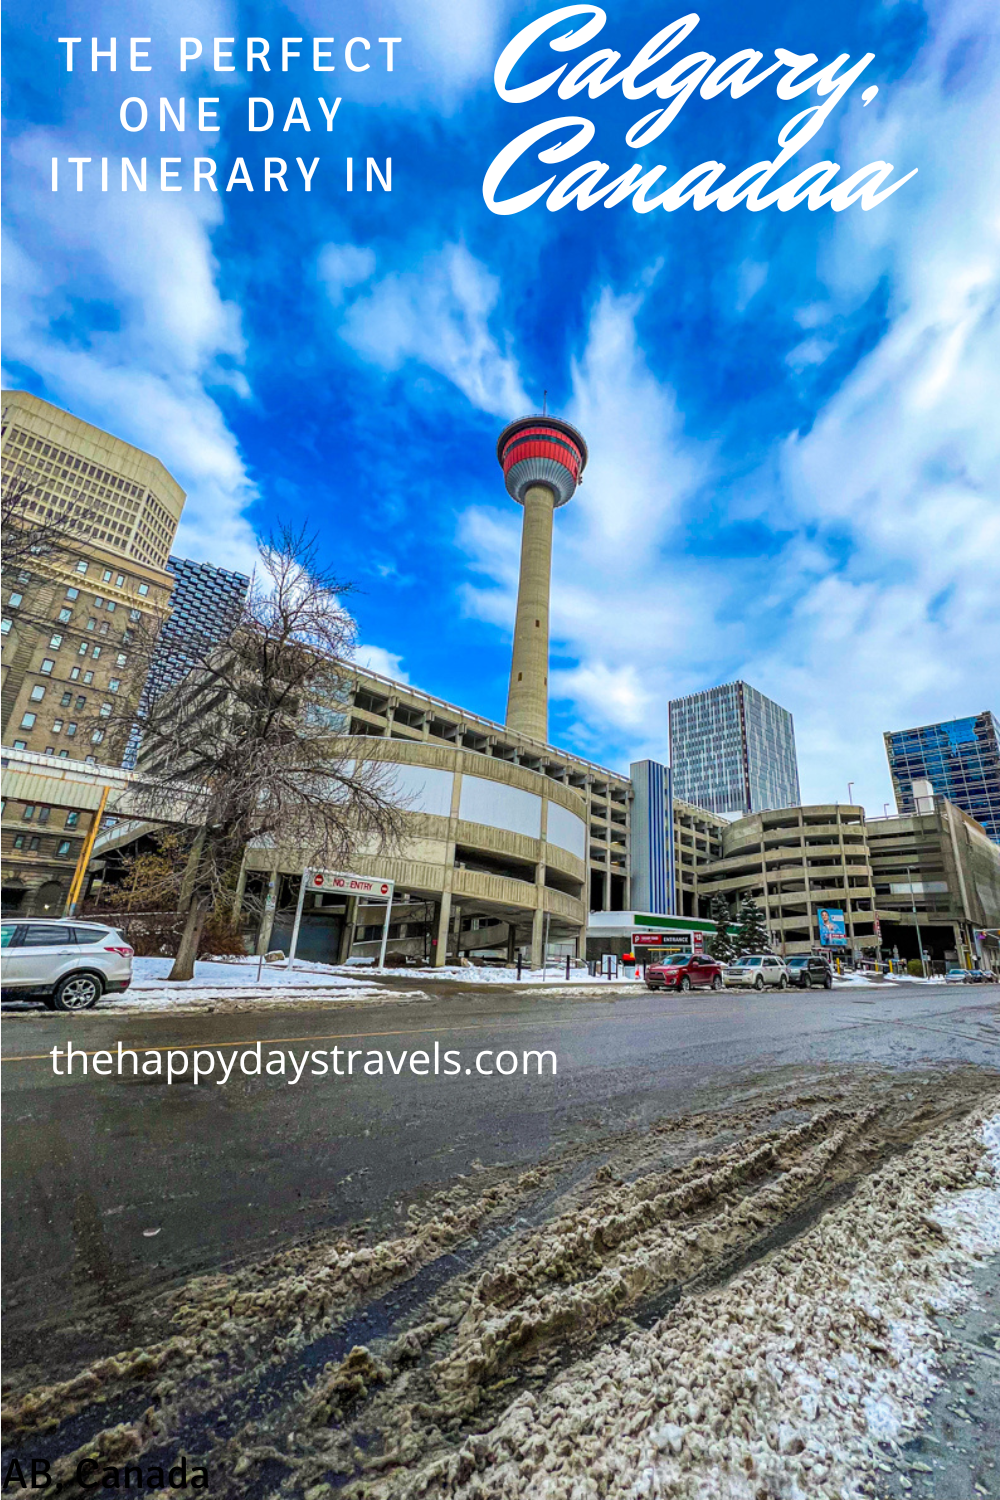 pin image of calgary tower. text reads 'the perfect one day itinerary in Calgary, Canada'